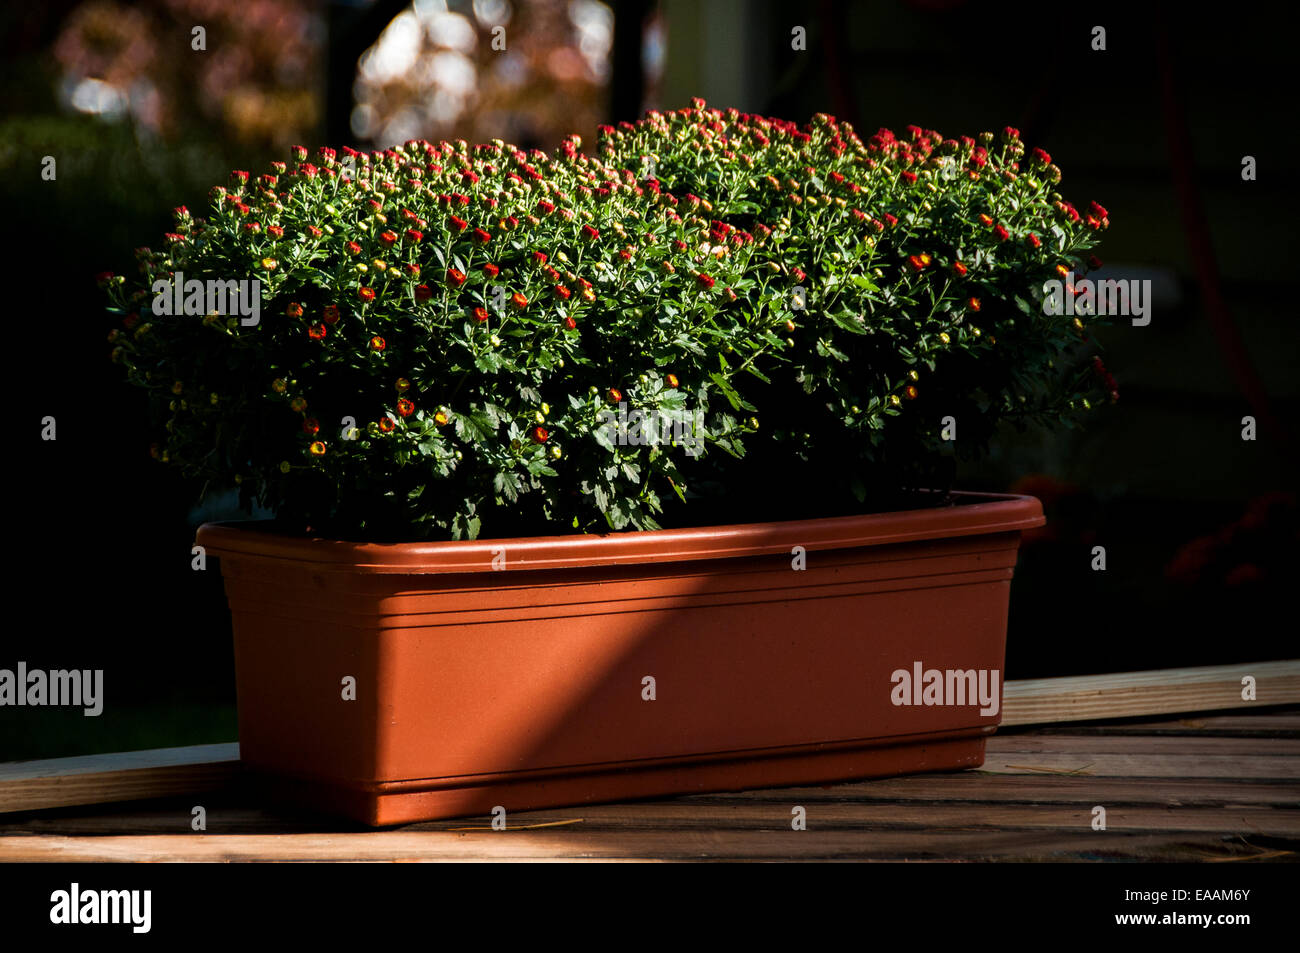 Bunches of budding Mums in a red/orange planter box on a wooden deck in warm sunlight. Stock Photo